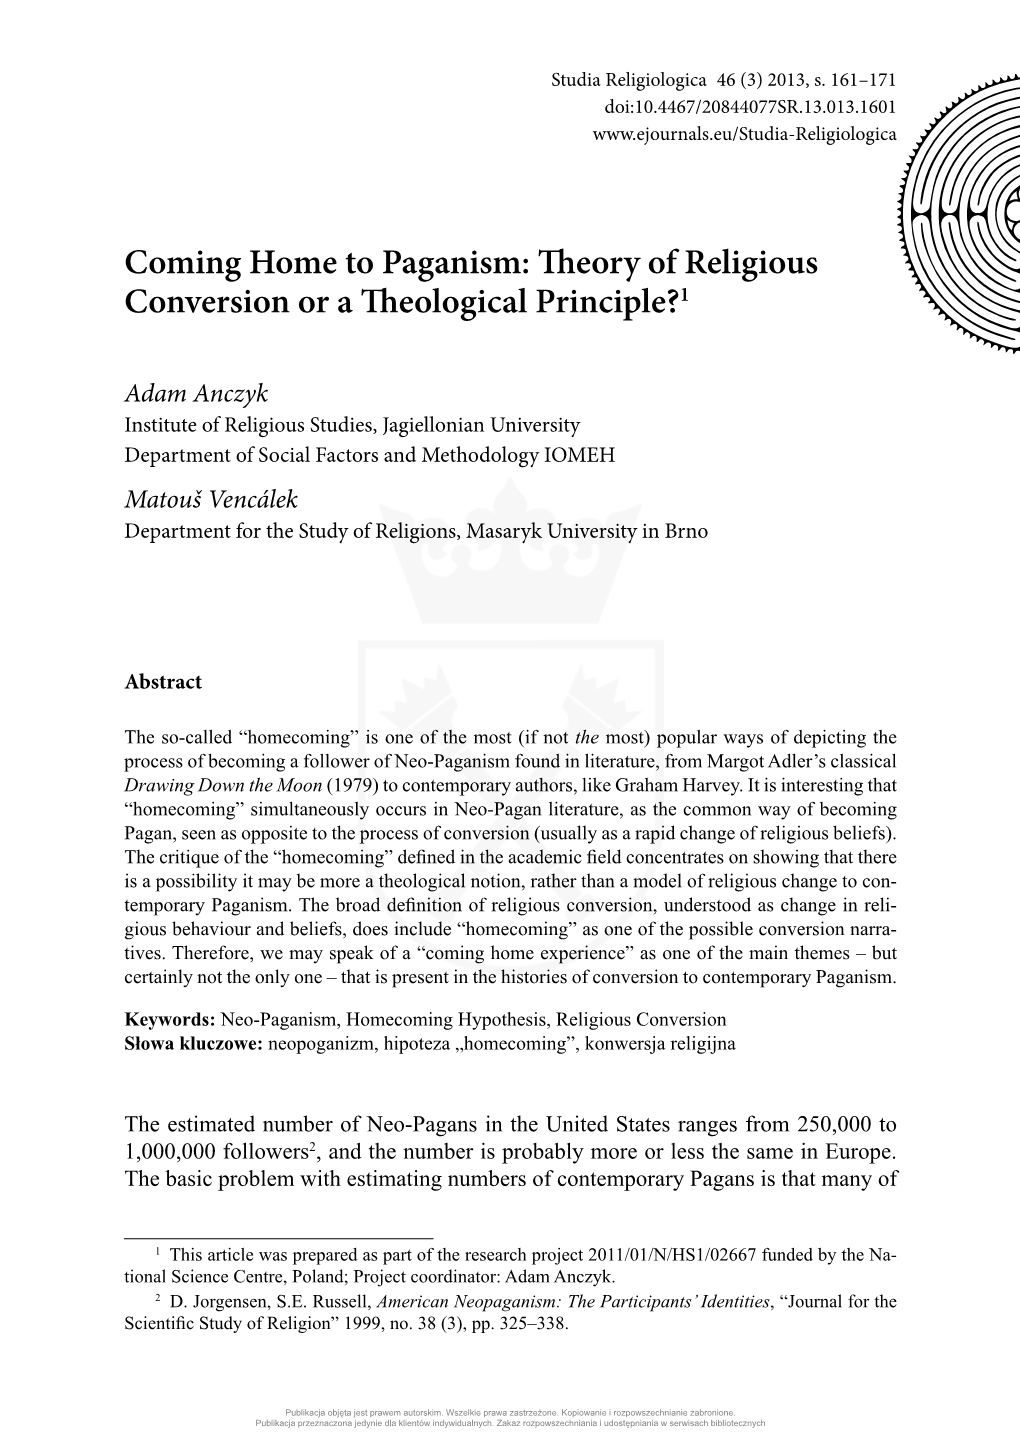 Coming Home to Paganism: Theory of Religious Conversion Or a Theological Principle?1